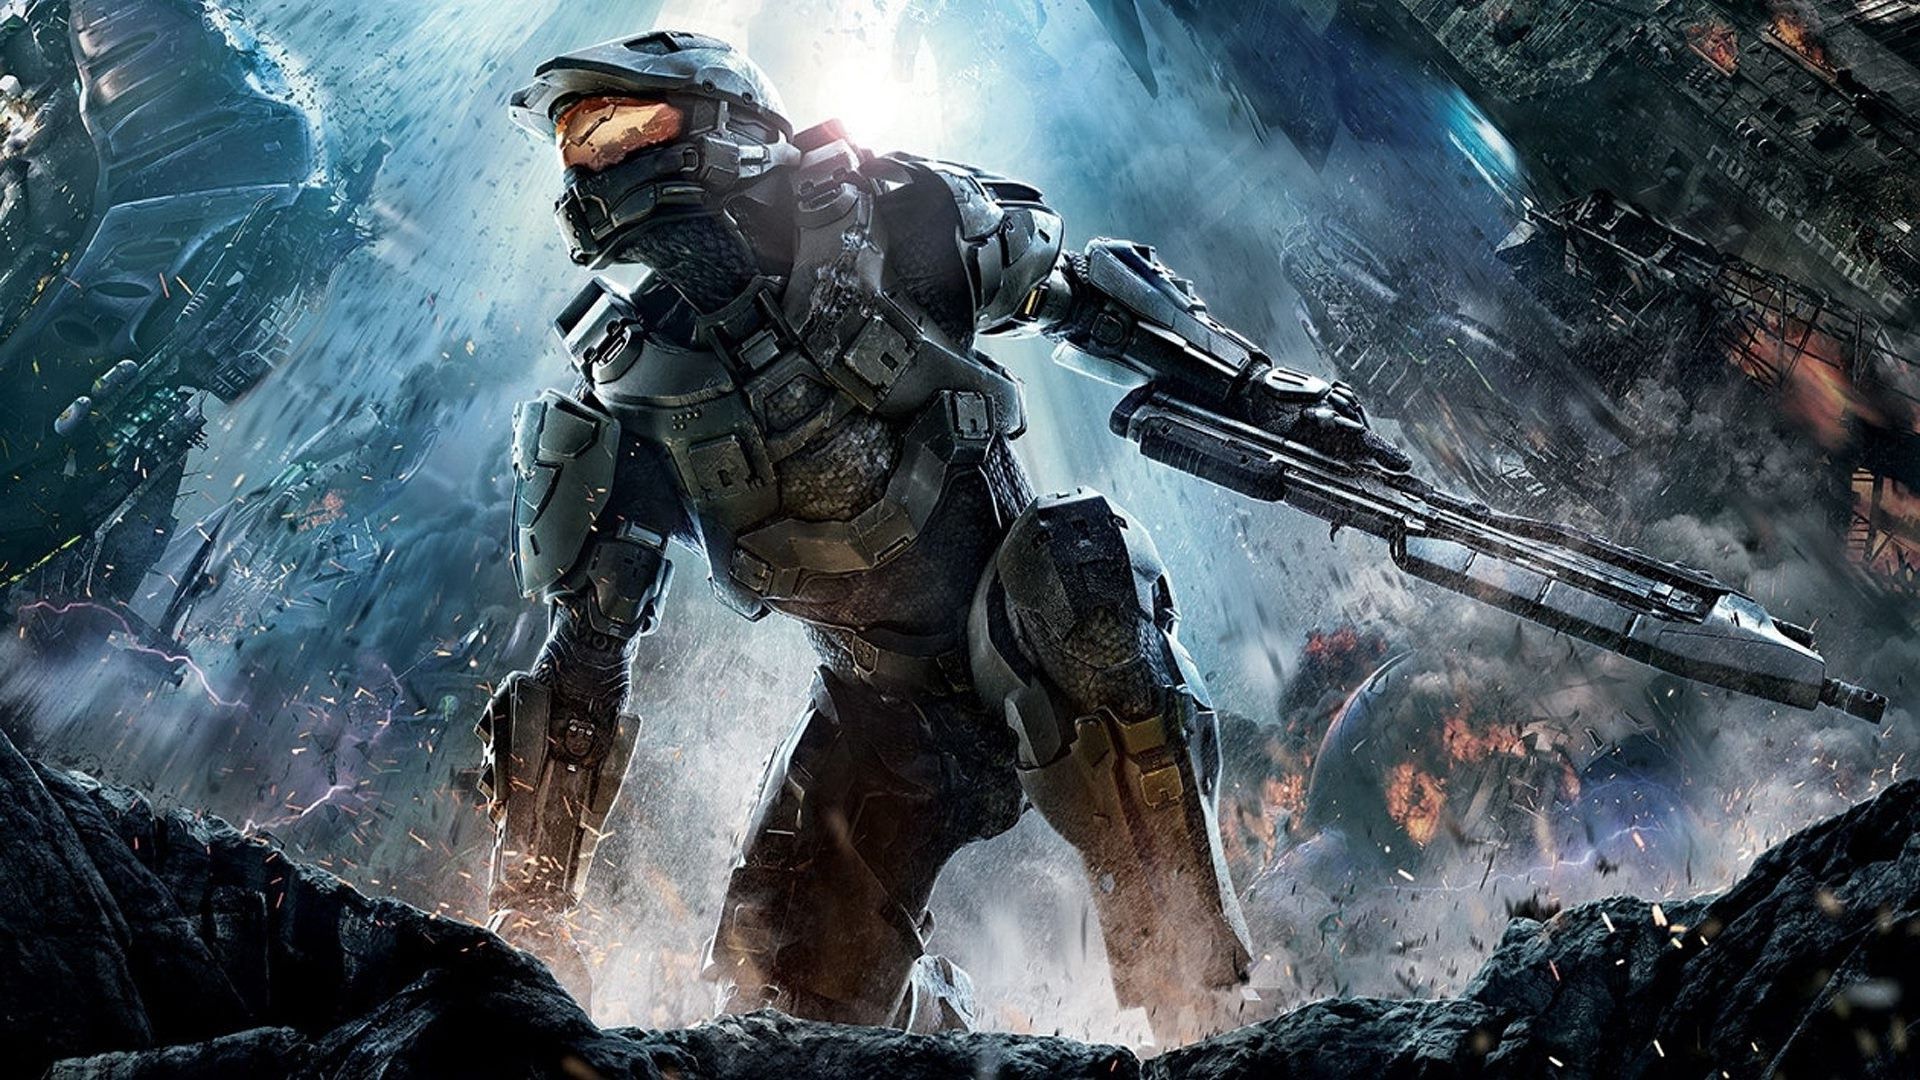 Top Halo 5 1080p Wallpaper Images for Pinterest